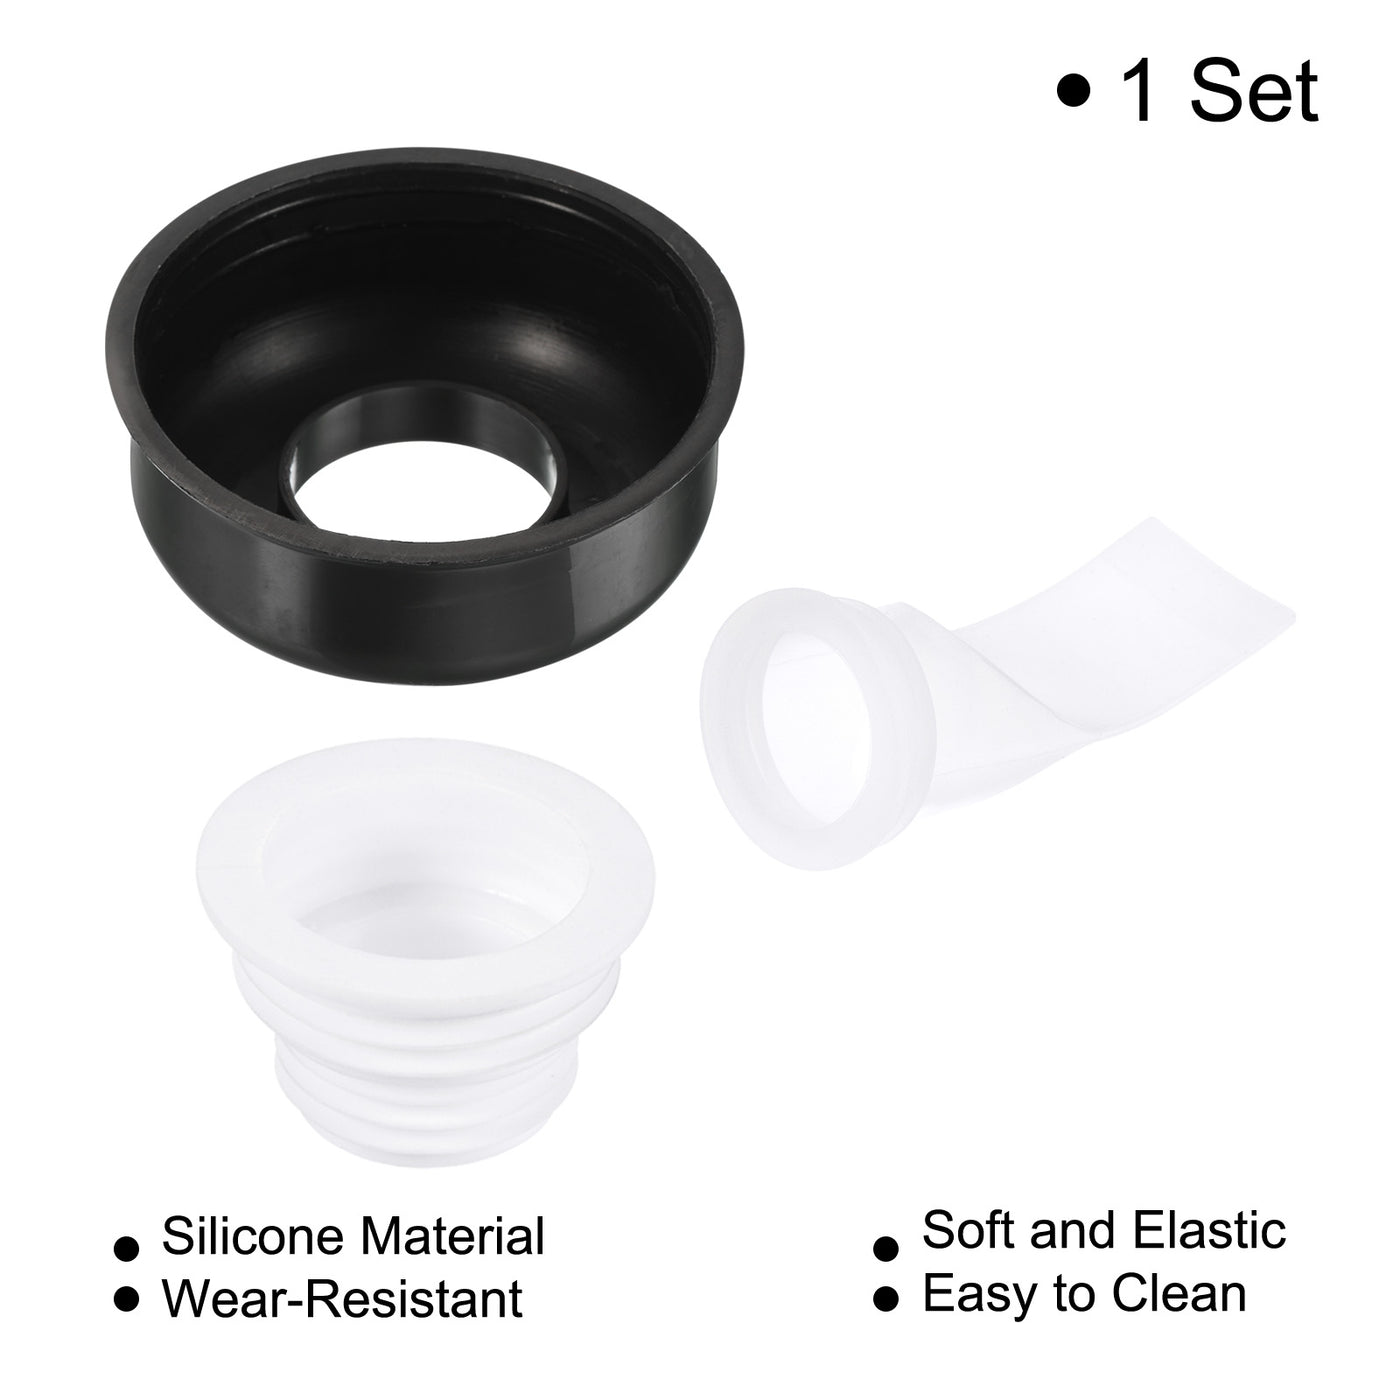 Harfington Sewer Drain Pipe Sealing Plug Silicone Hose Stopper with Decorative Cover and Anti-odor Core for Kitchen Bathroom